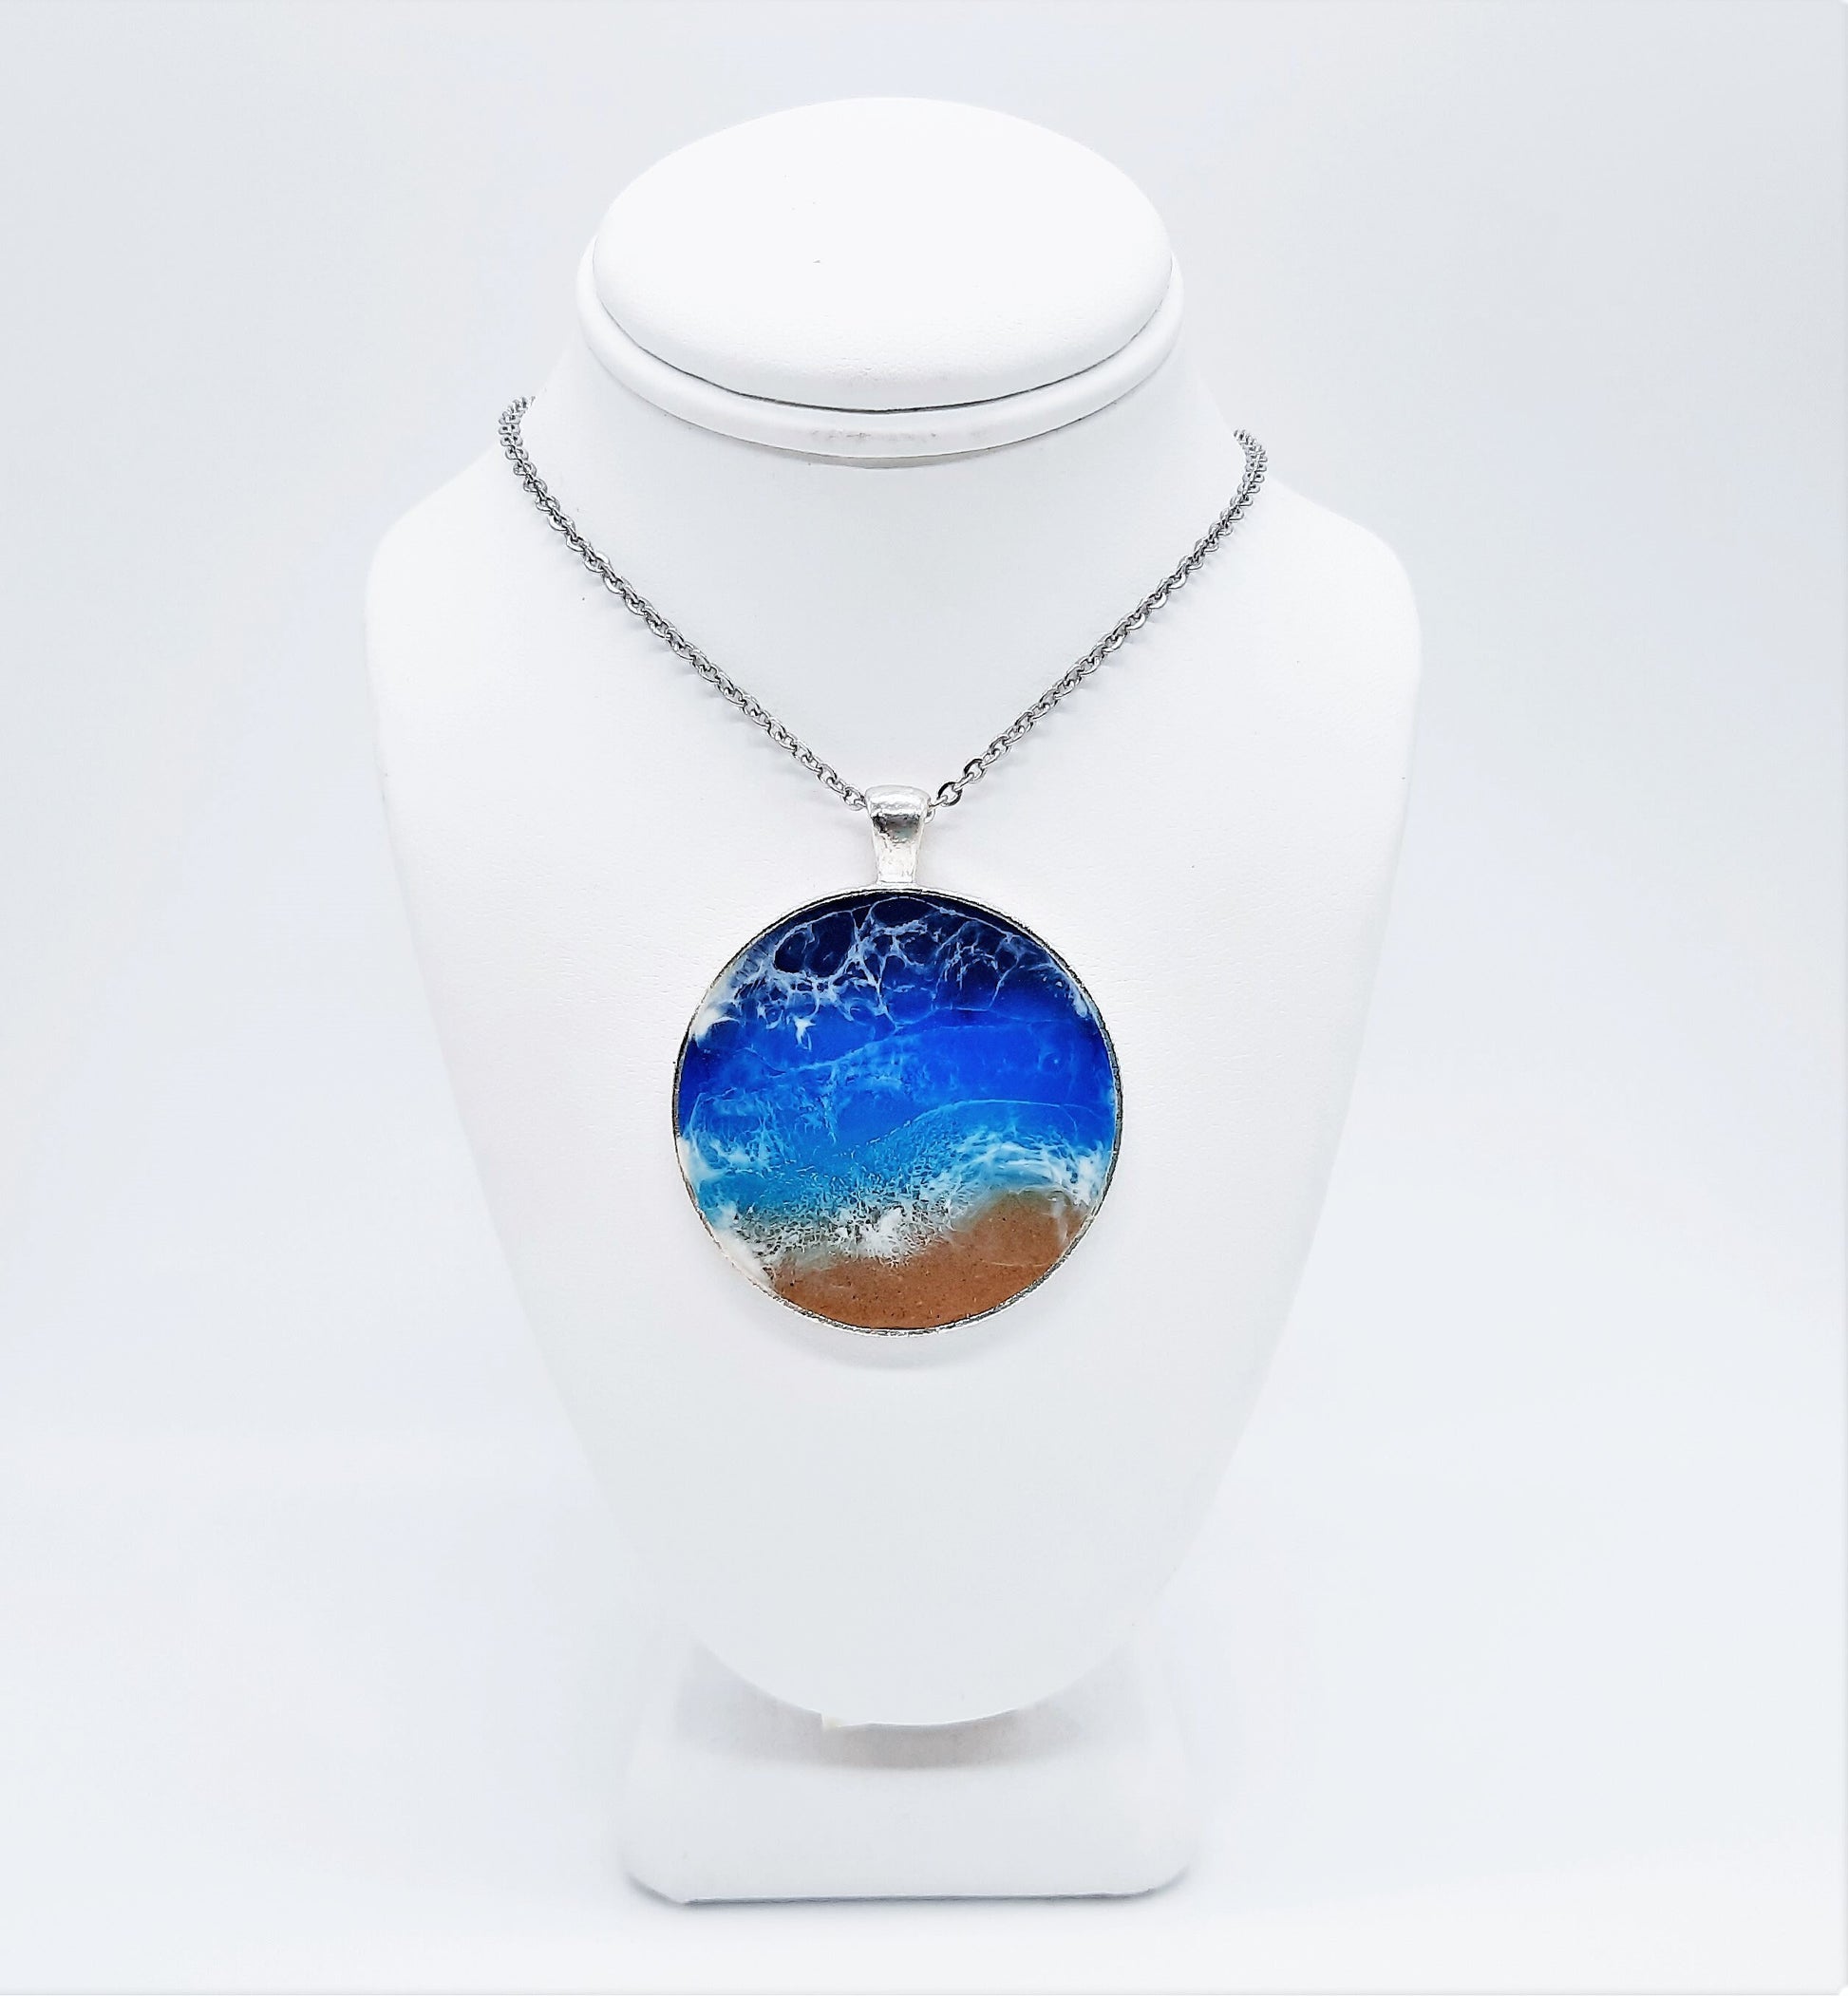 Resin Waves Extra Large Round Shaped Ocean Pendant / Beach Scene Necklace, Handmade w/ Resin & Real Sand - One of a Kind - Not a Photograph!